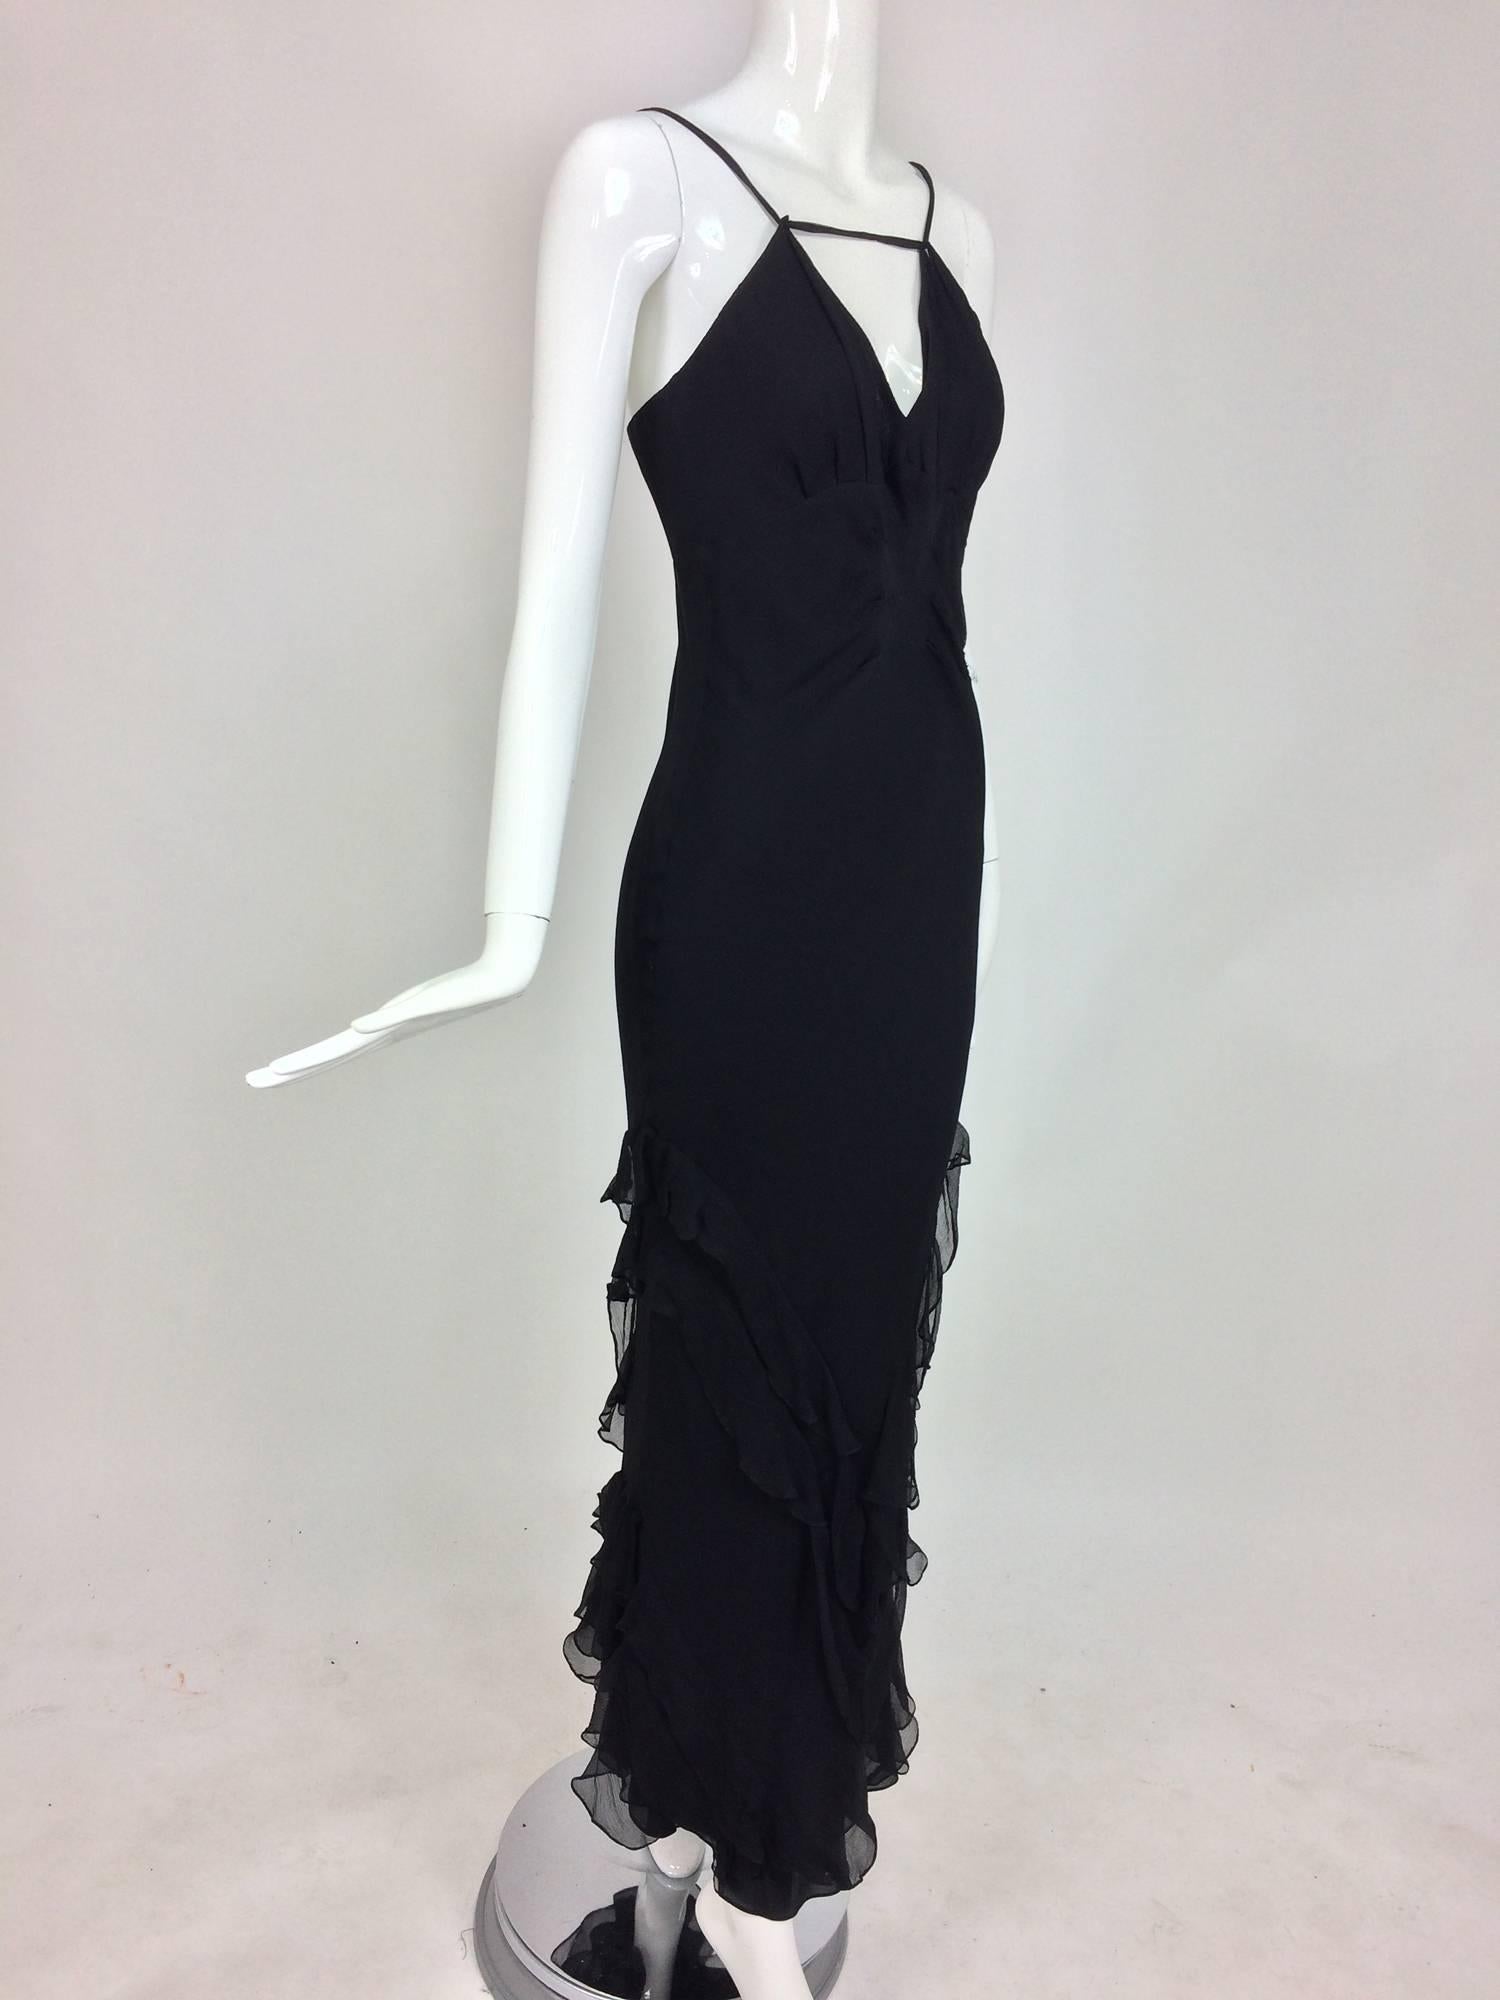 J. Mendel halter neck black tiered ruffle chiffon evening dress...Sexy halter neck gown has chiffon cords that adjust to fit a larger bust then the mannequin we uses, has...Bias cut gown hugs the body...The lower skirt has flirty ruffles...The dress